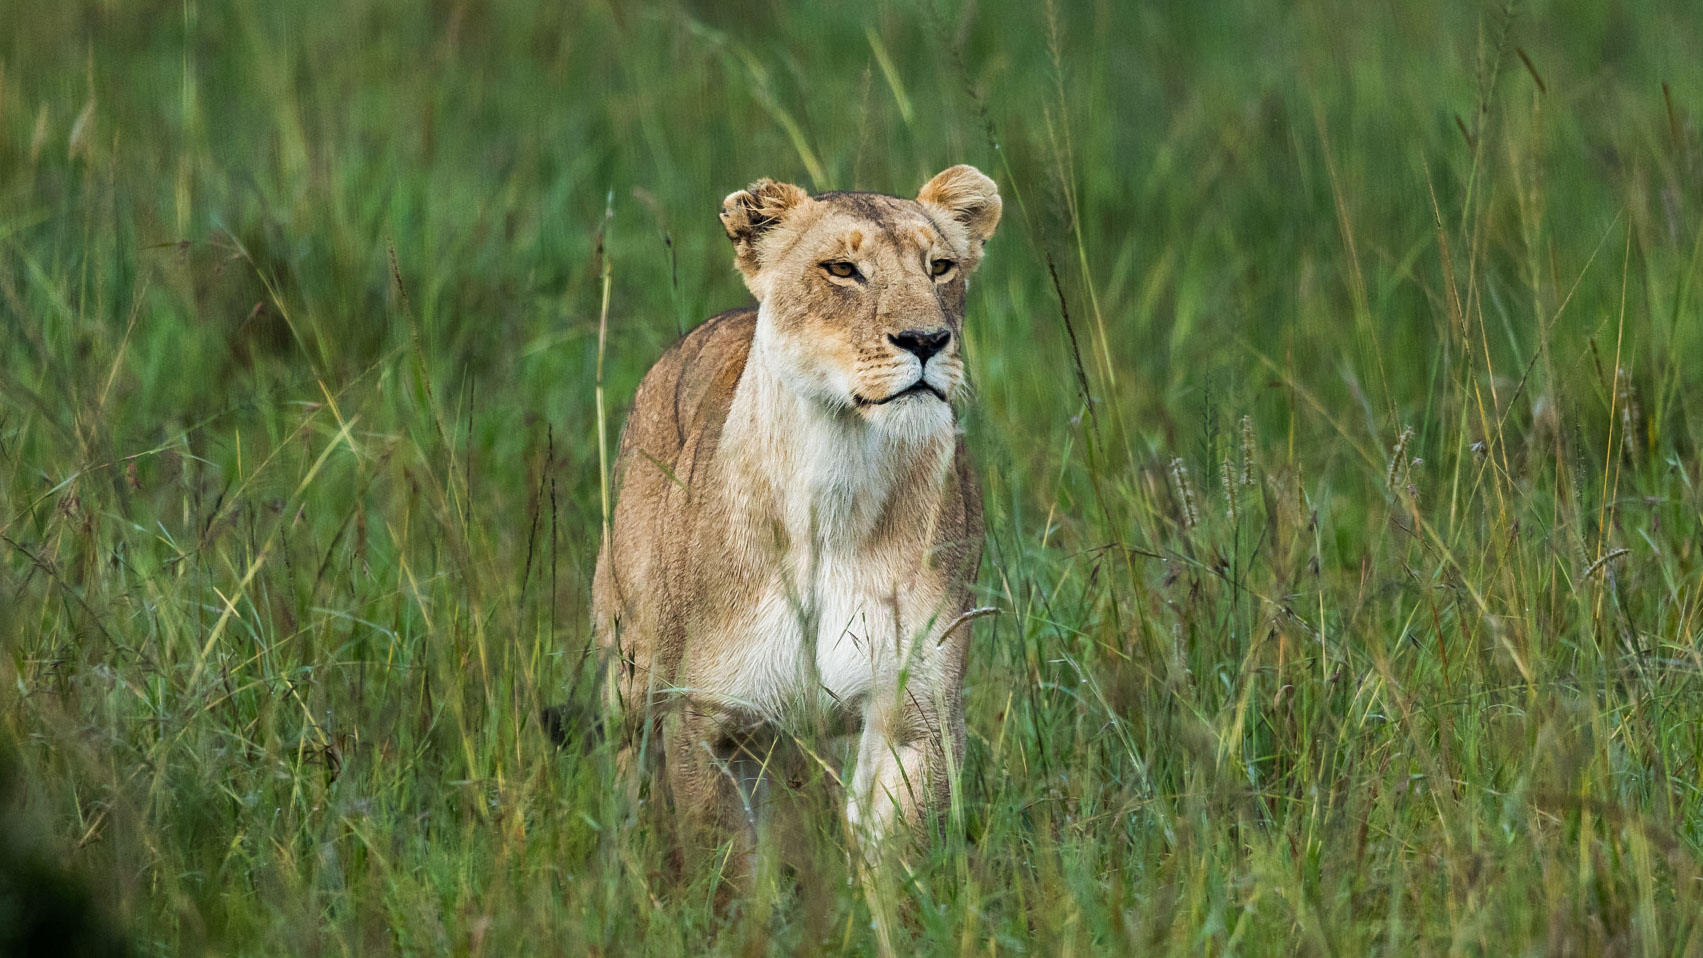 Above: The Swamp Lioness hunts silently in the mist